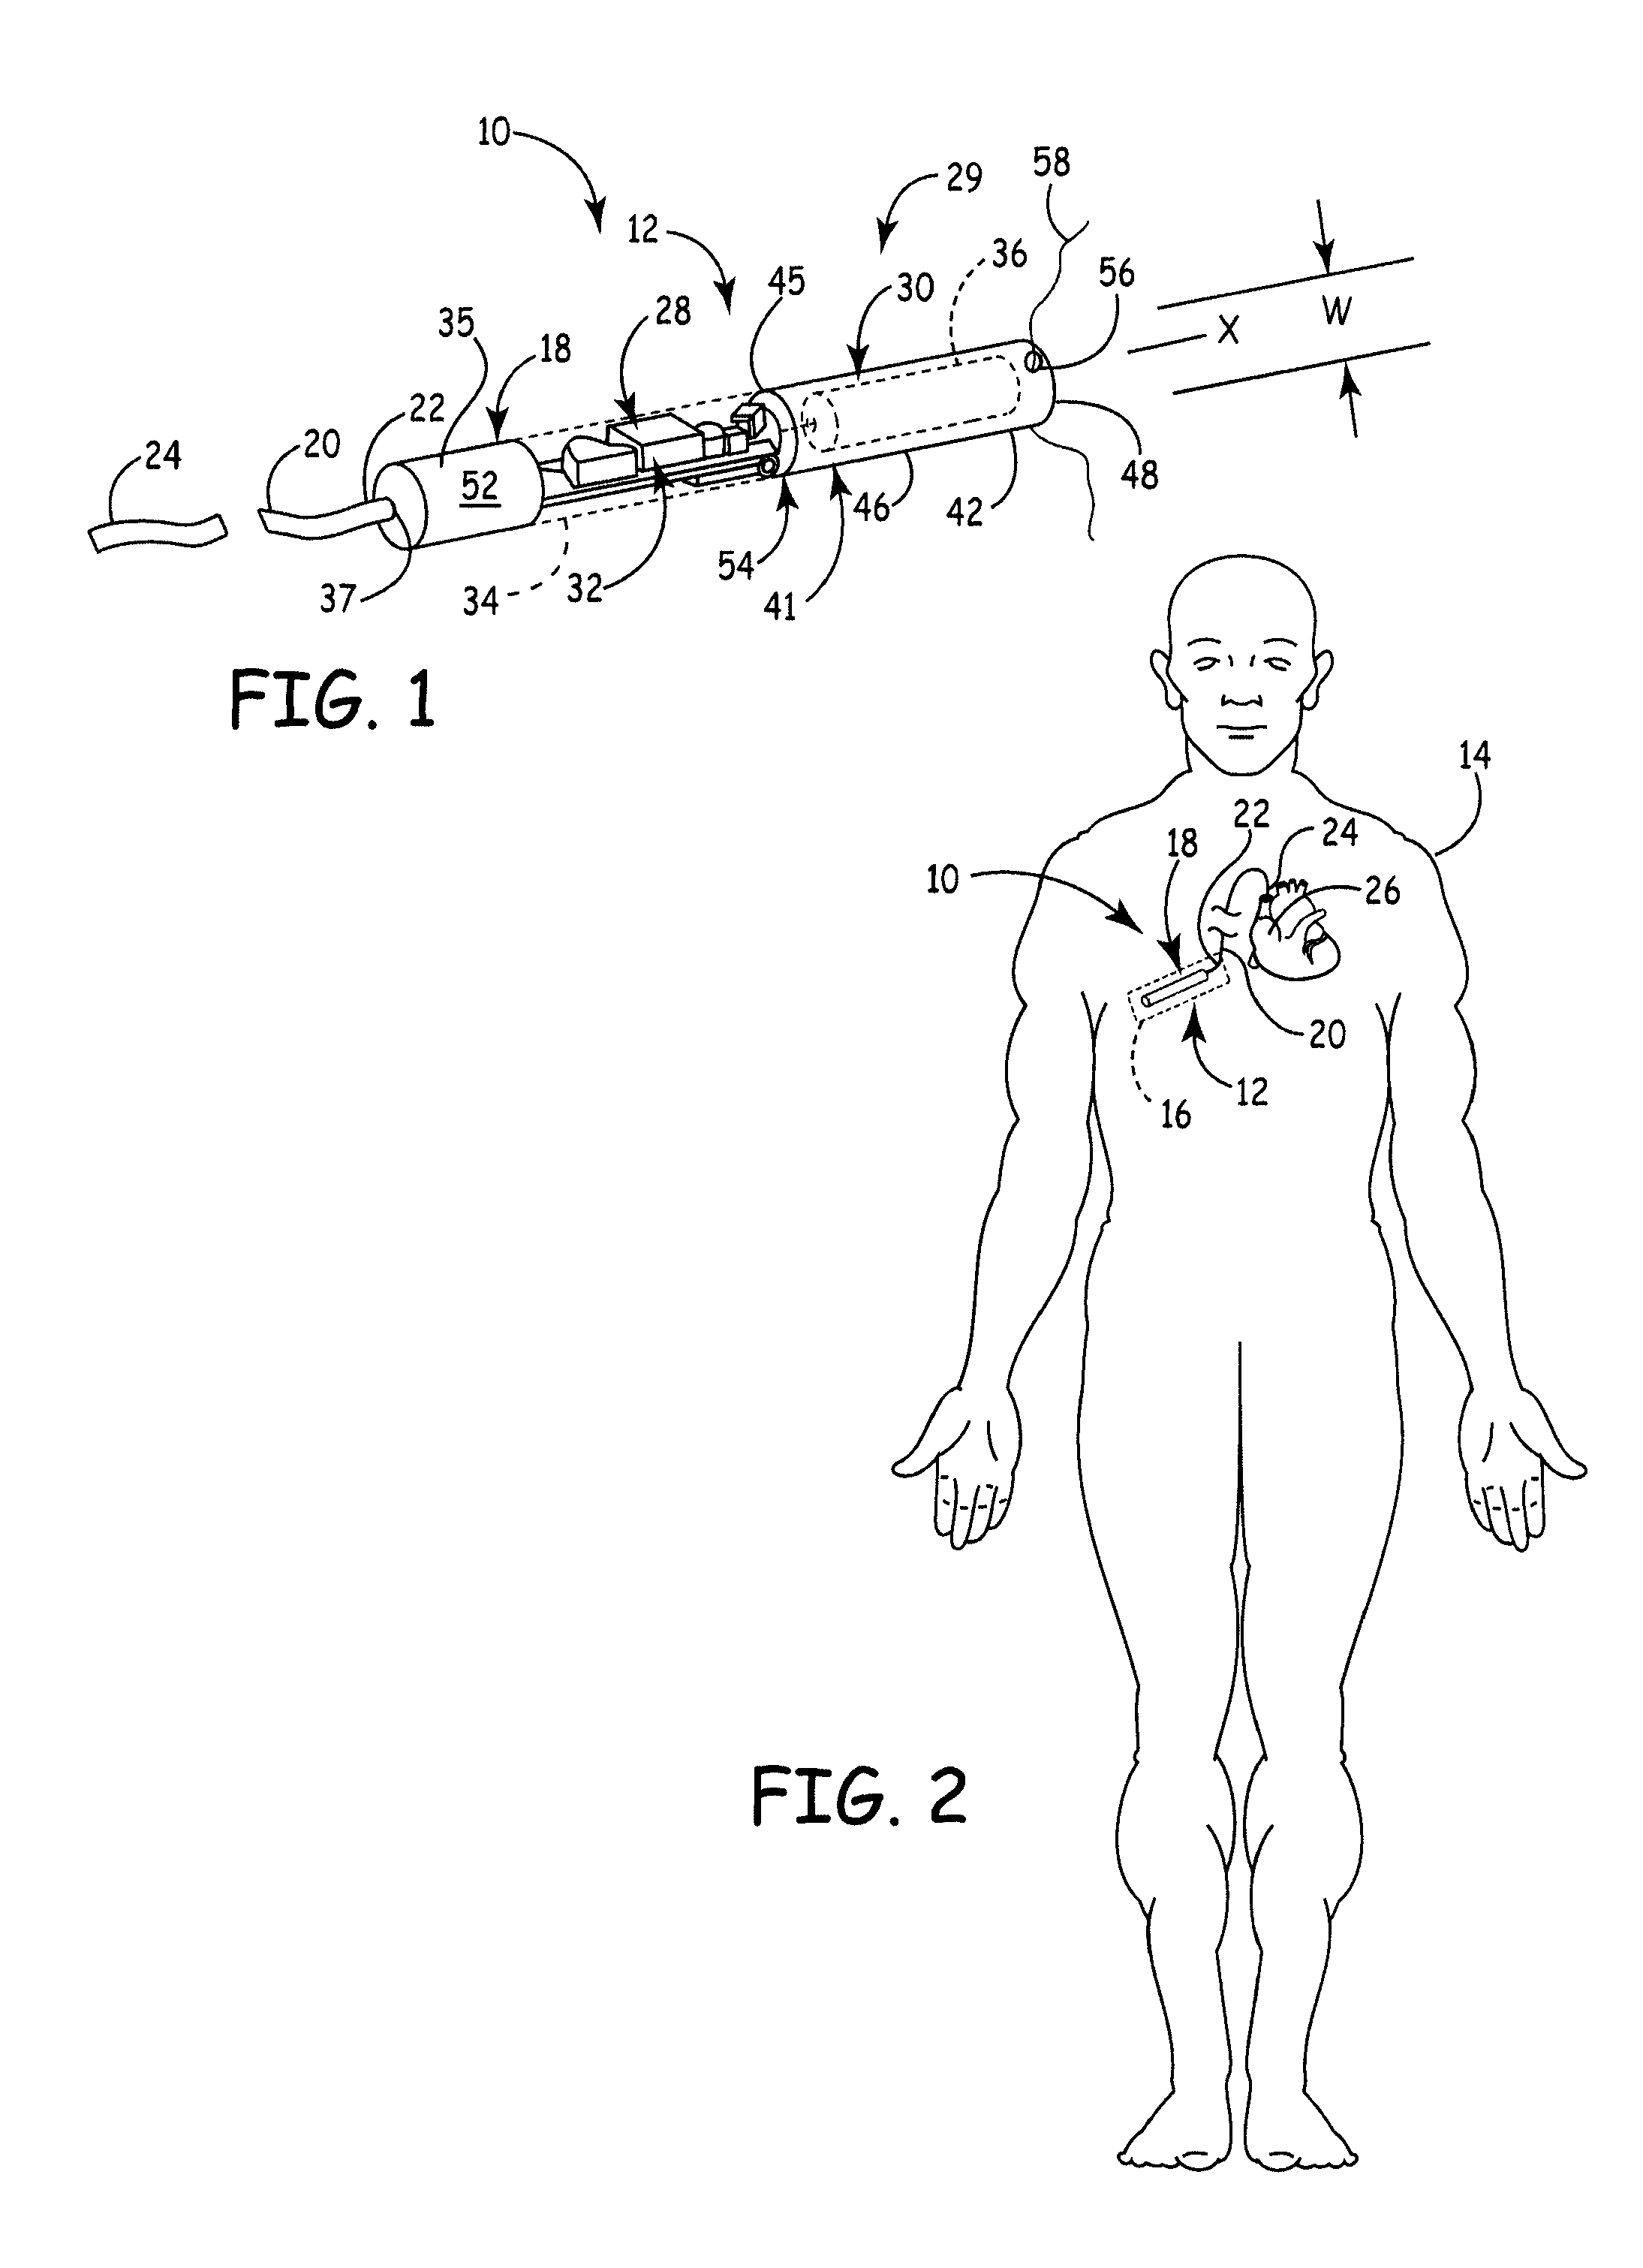 Elongate battery for implantable medical device